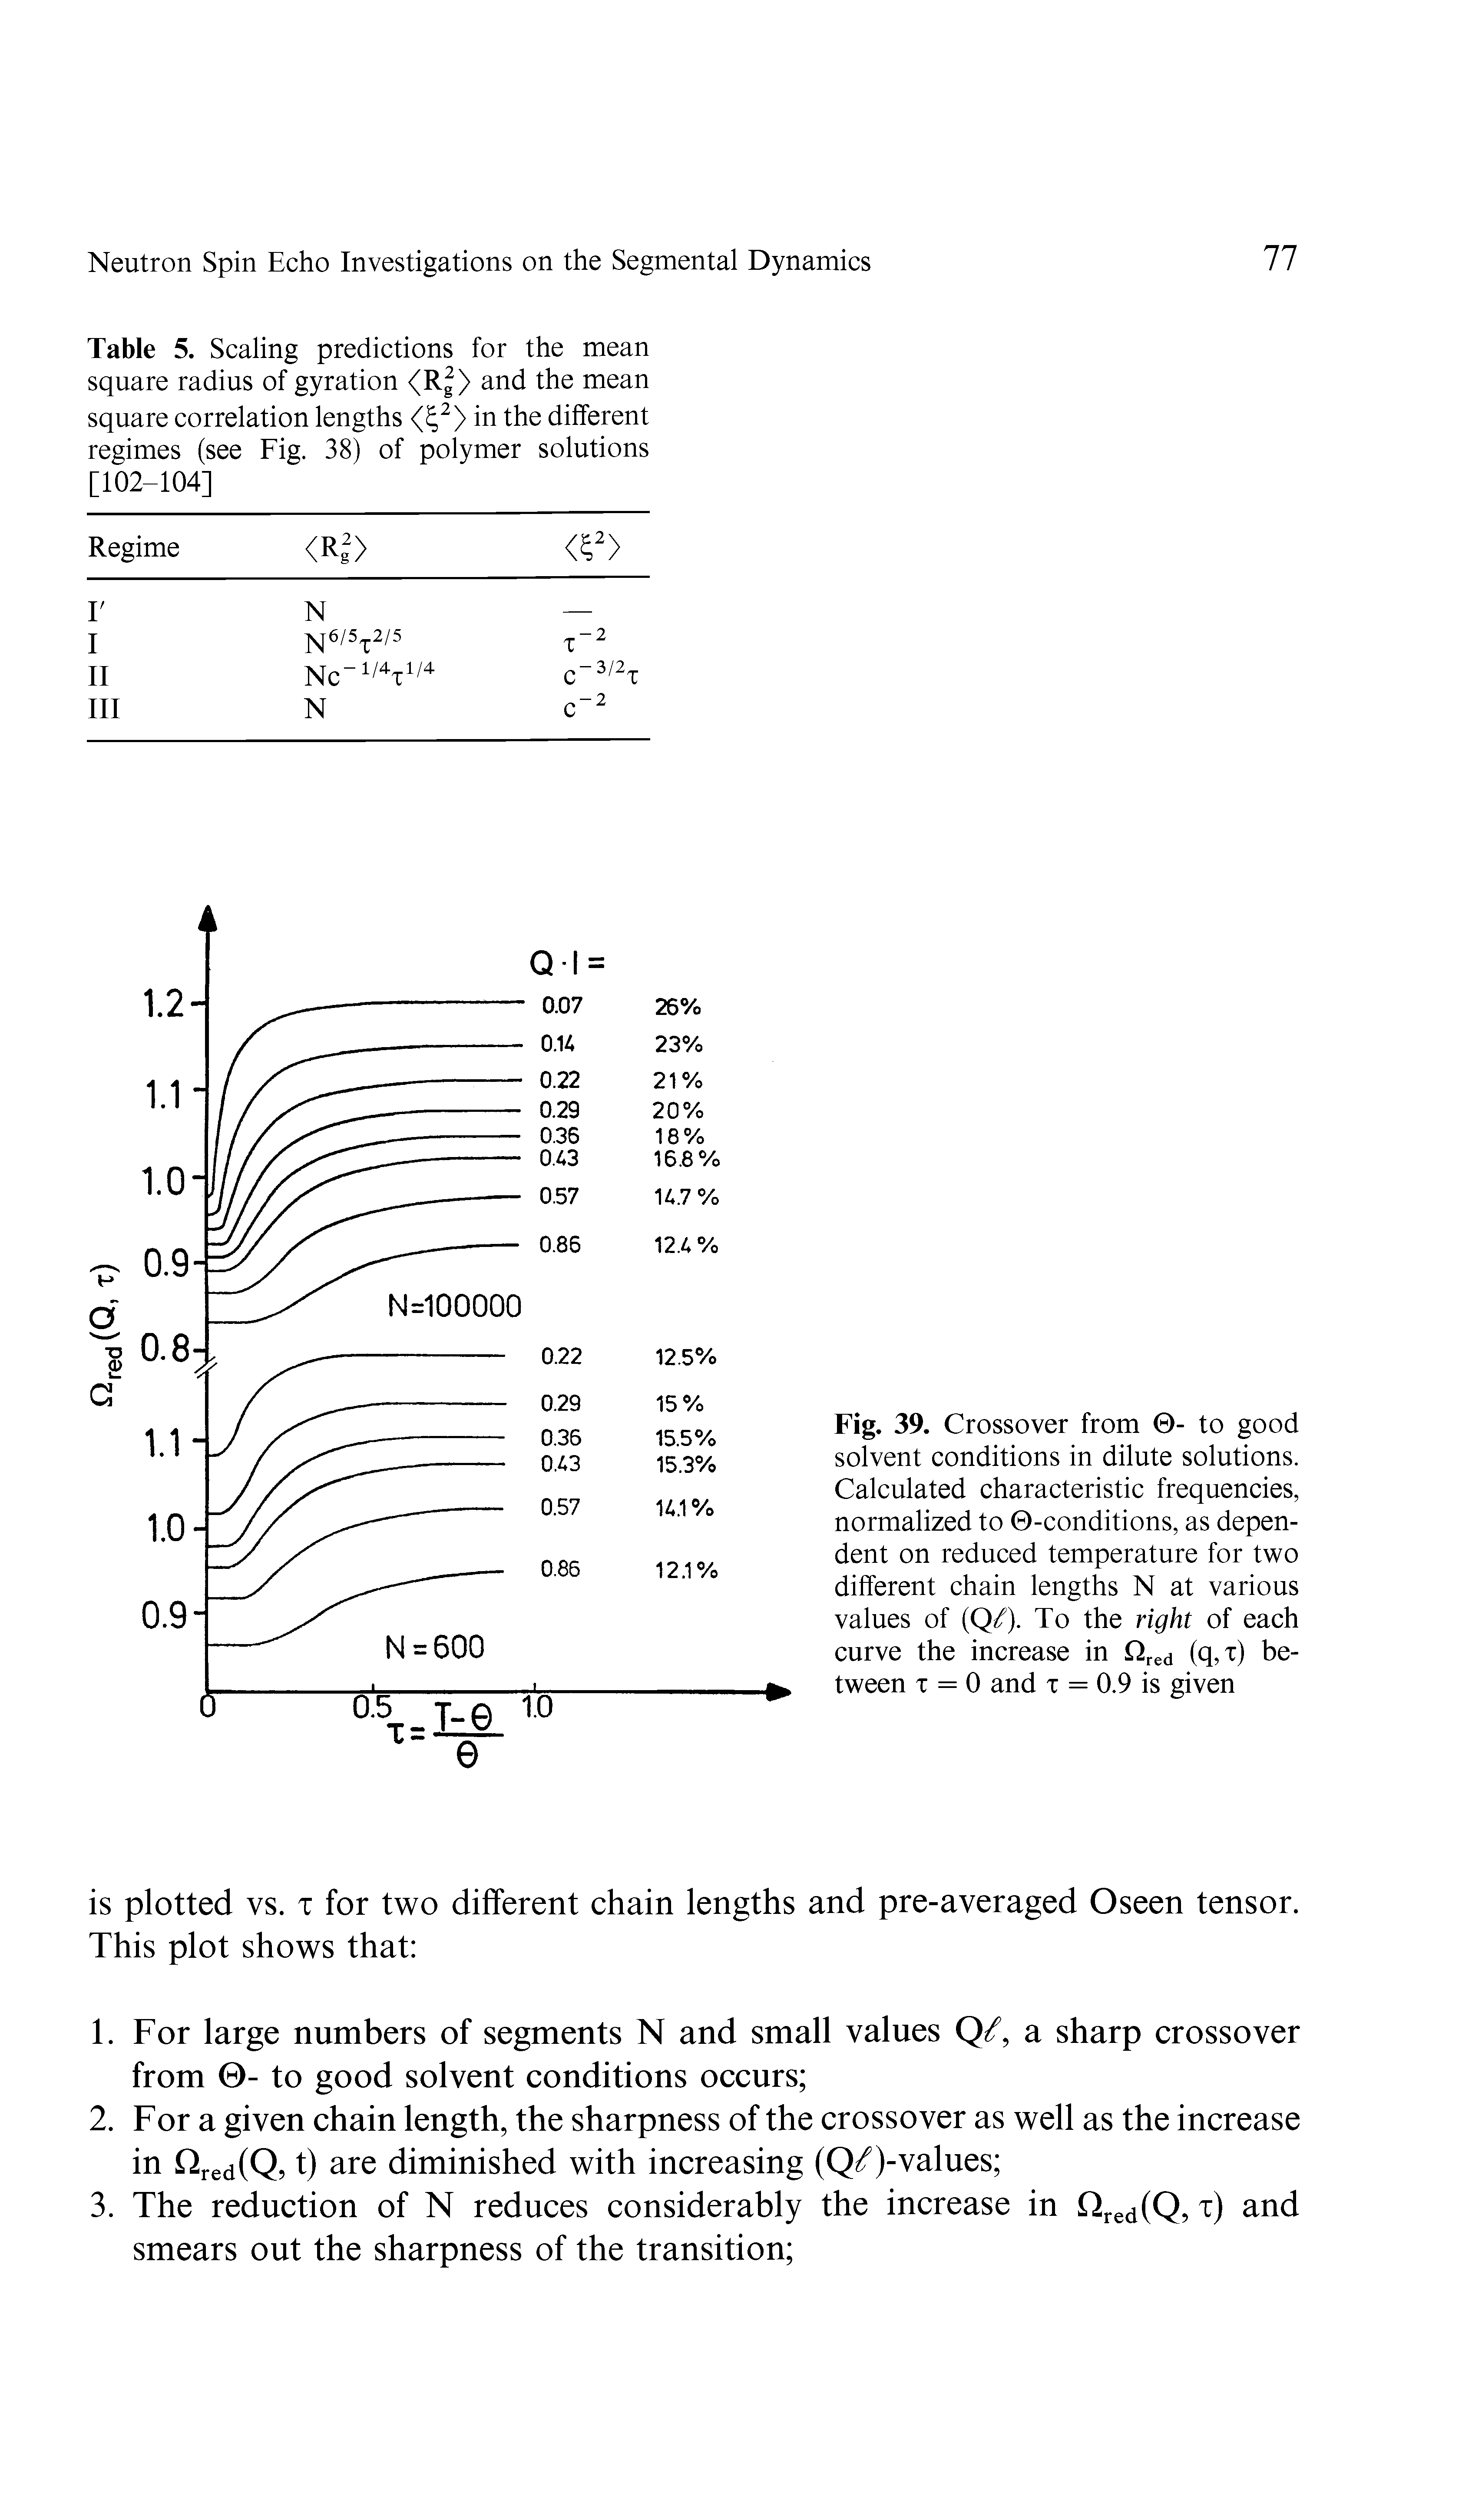 Table 5. Scaling predictions for the mean square radius of gyration <R2> and the mean square correlation lengths < 2> in the different regimes (see Fig. 38) of polymer solutions [102-104]...